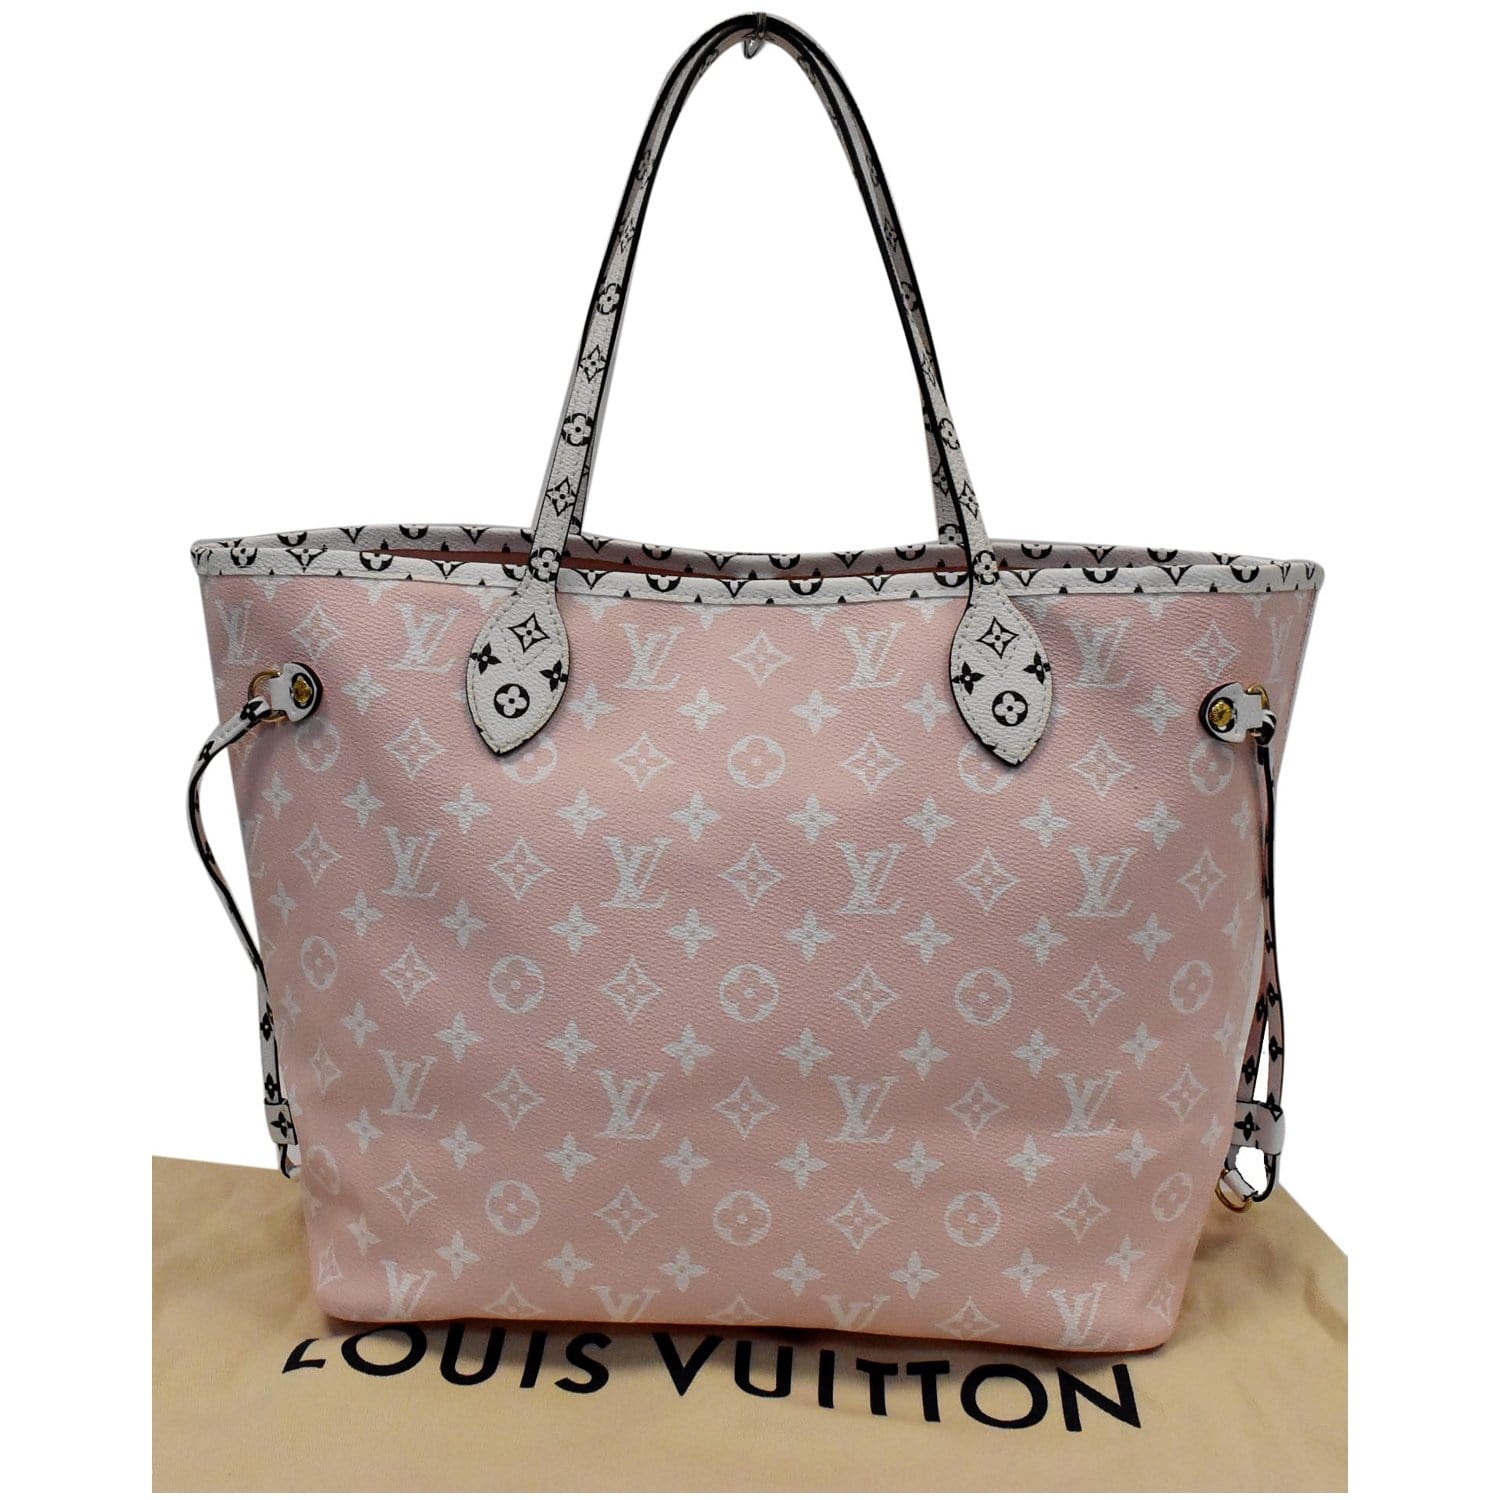 LOUIS VUITTON Monogram Giant Neverfull MM Tote Bag Pink Red M44567